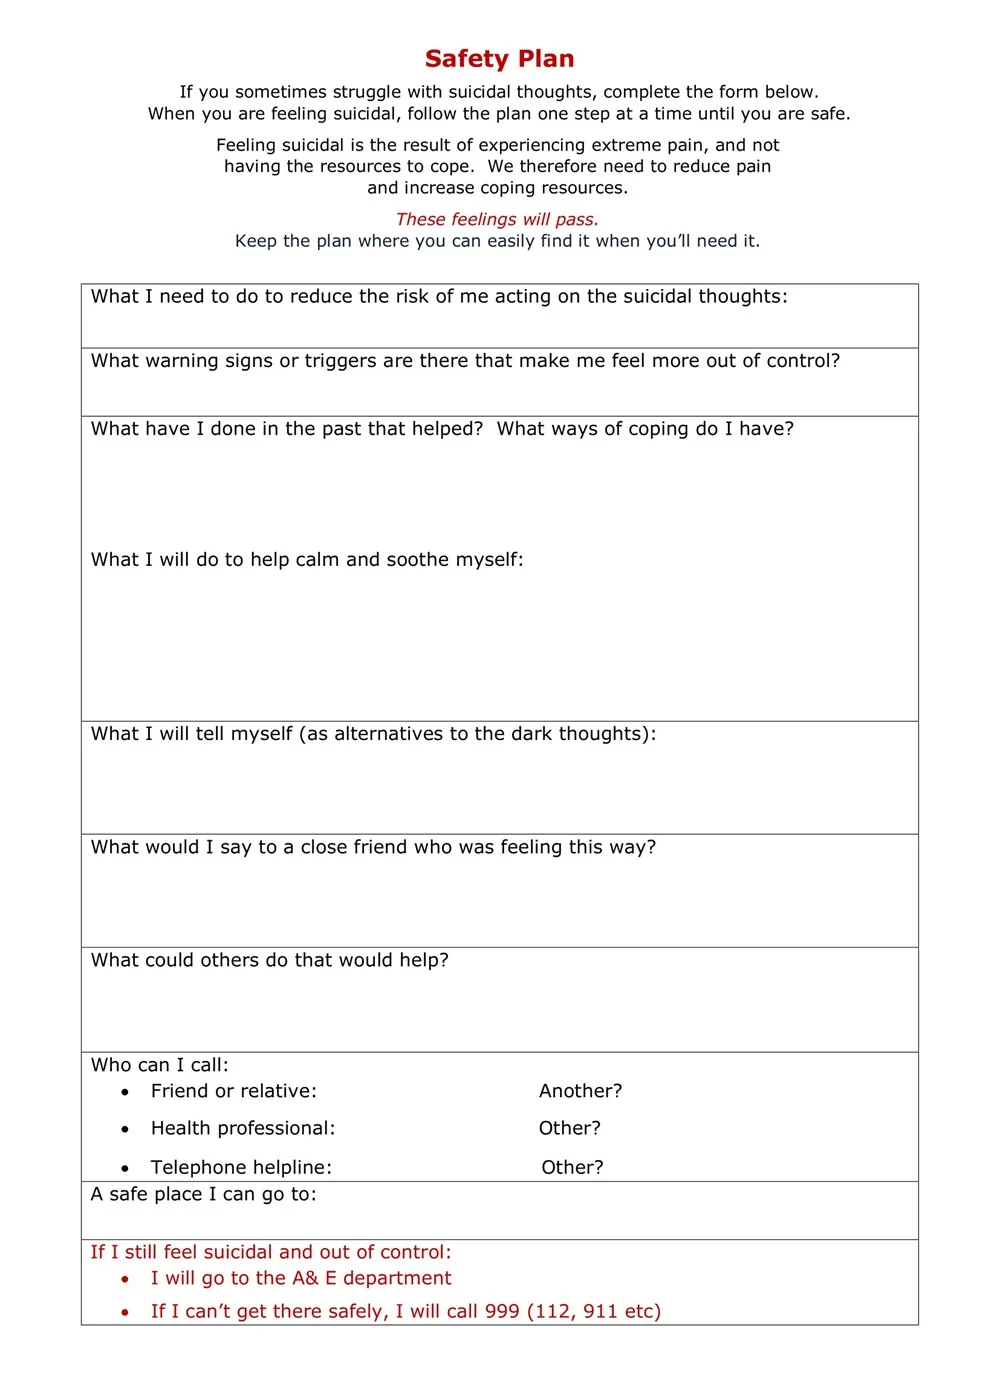 Sample Safety Plan Template